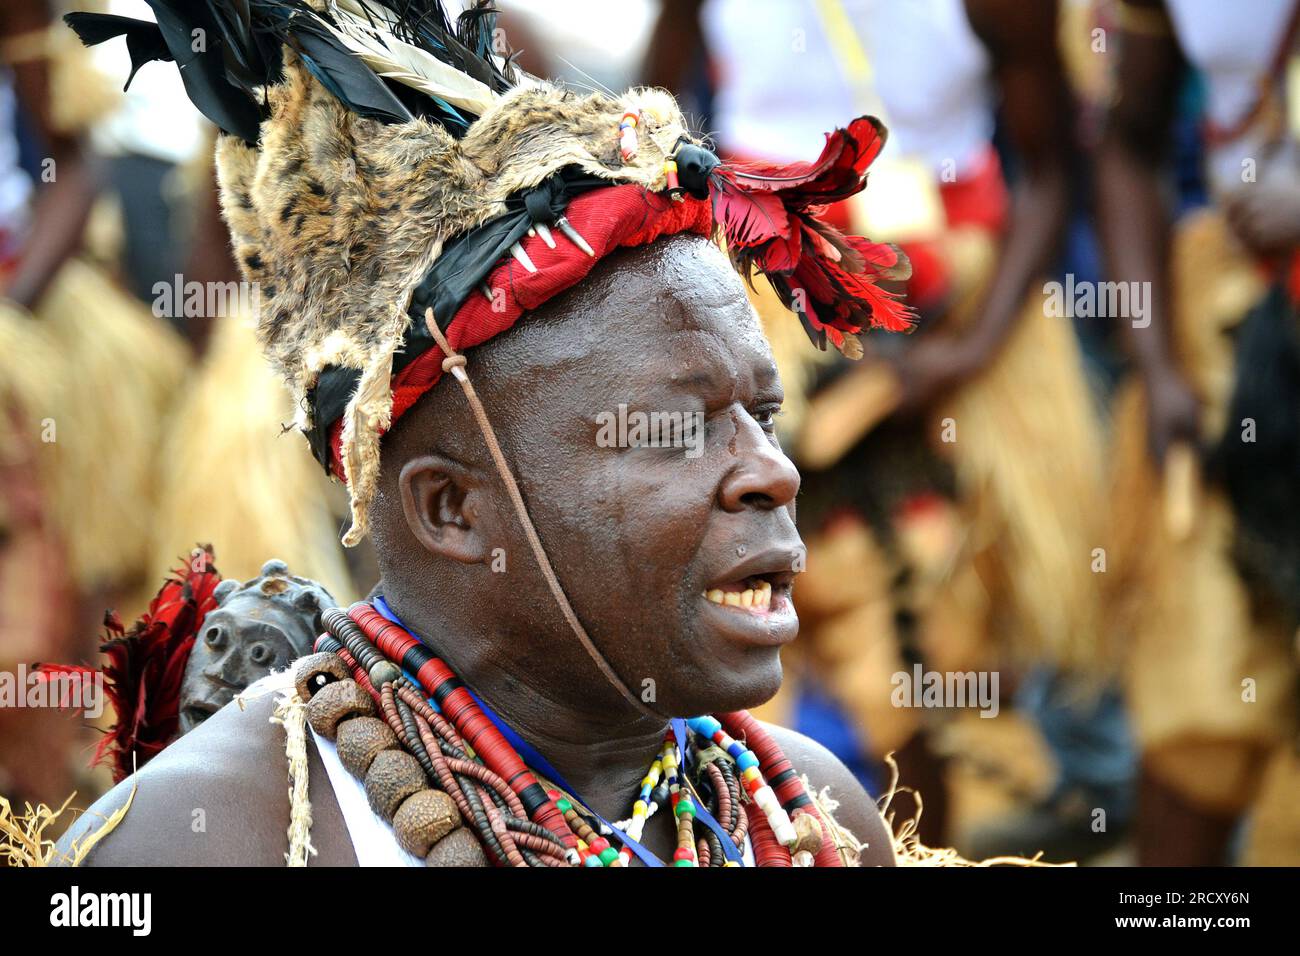 Congolese traditional artist during an exhibition in Sibiti (located between Brazzaville and Pointe-Noire), during an official ceremony, 13 August 2014 Stock Photo